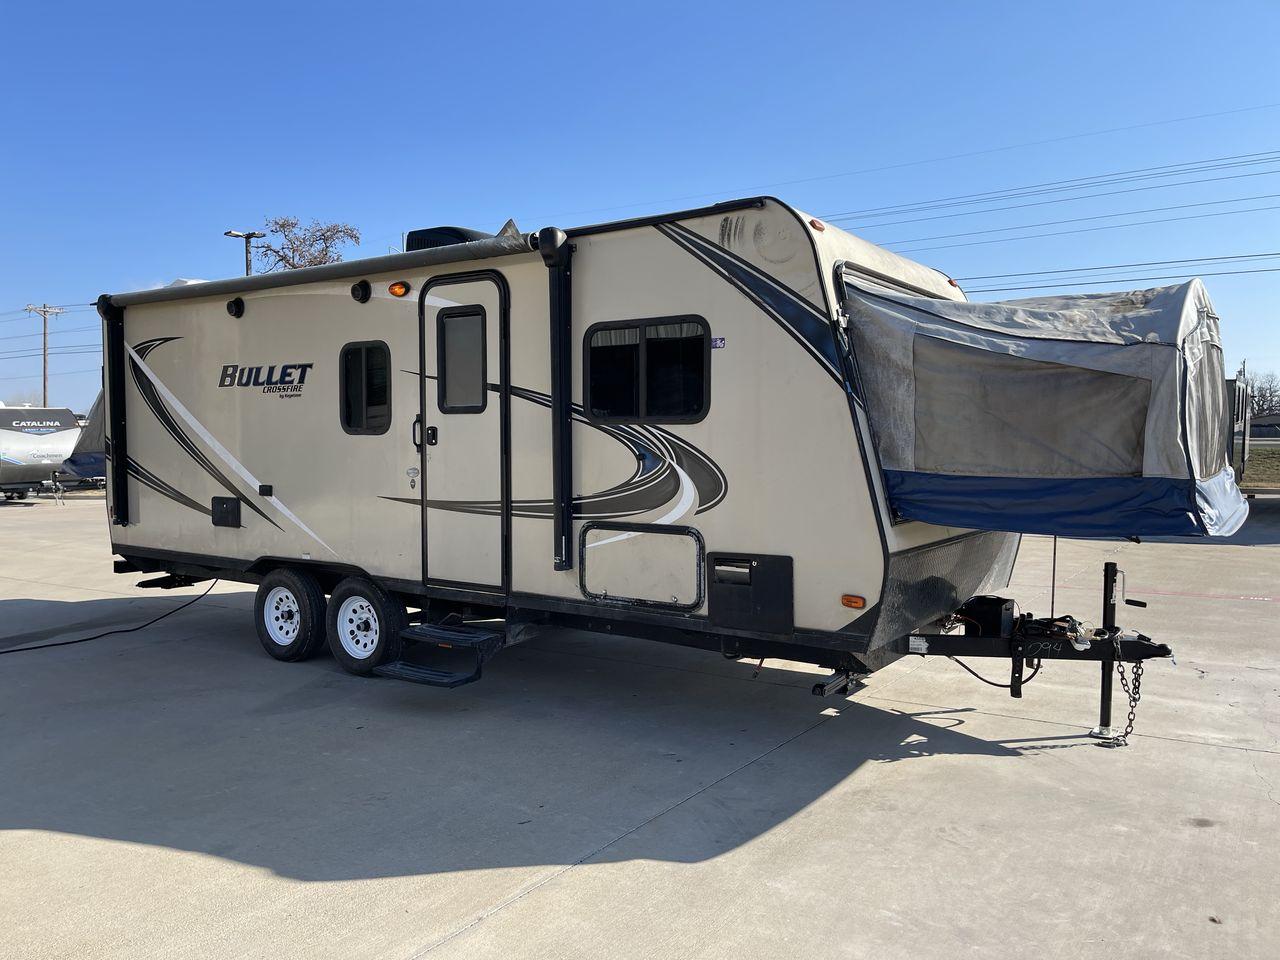 2018 BULLET CROSSFIRE 2190EX (4YDT21923JT) , Length: 25.08 ft. | Dry Weight: 4,410 lbs. | Gross Weight: 6,300 lbs. | Slides: 1 transmission, located at 4319 N Main Street, Cleburne, TX, 76033, (817) 221-0660, 32.435829, -97.384178 - The 2018 Bullet Crossfire 2190EX is a lightweight vacation trailer that can be used for a variety of activities. This trailer is 25.08 feet long and weighs 4,410 pounds dry. It is easy to pull and move, which makes it great for both short trips and longer vacations. Even though it's small, the Cross - Photo #23